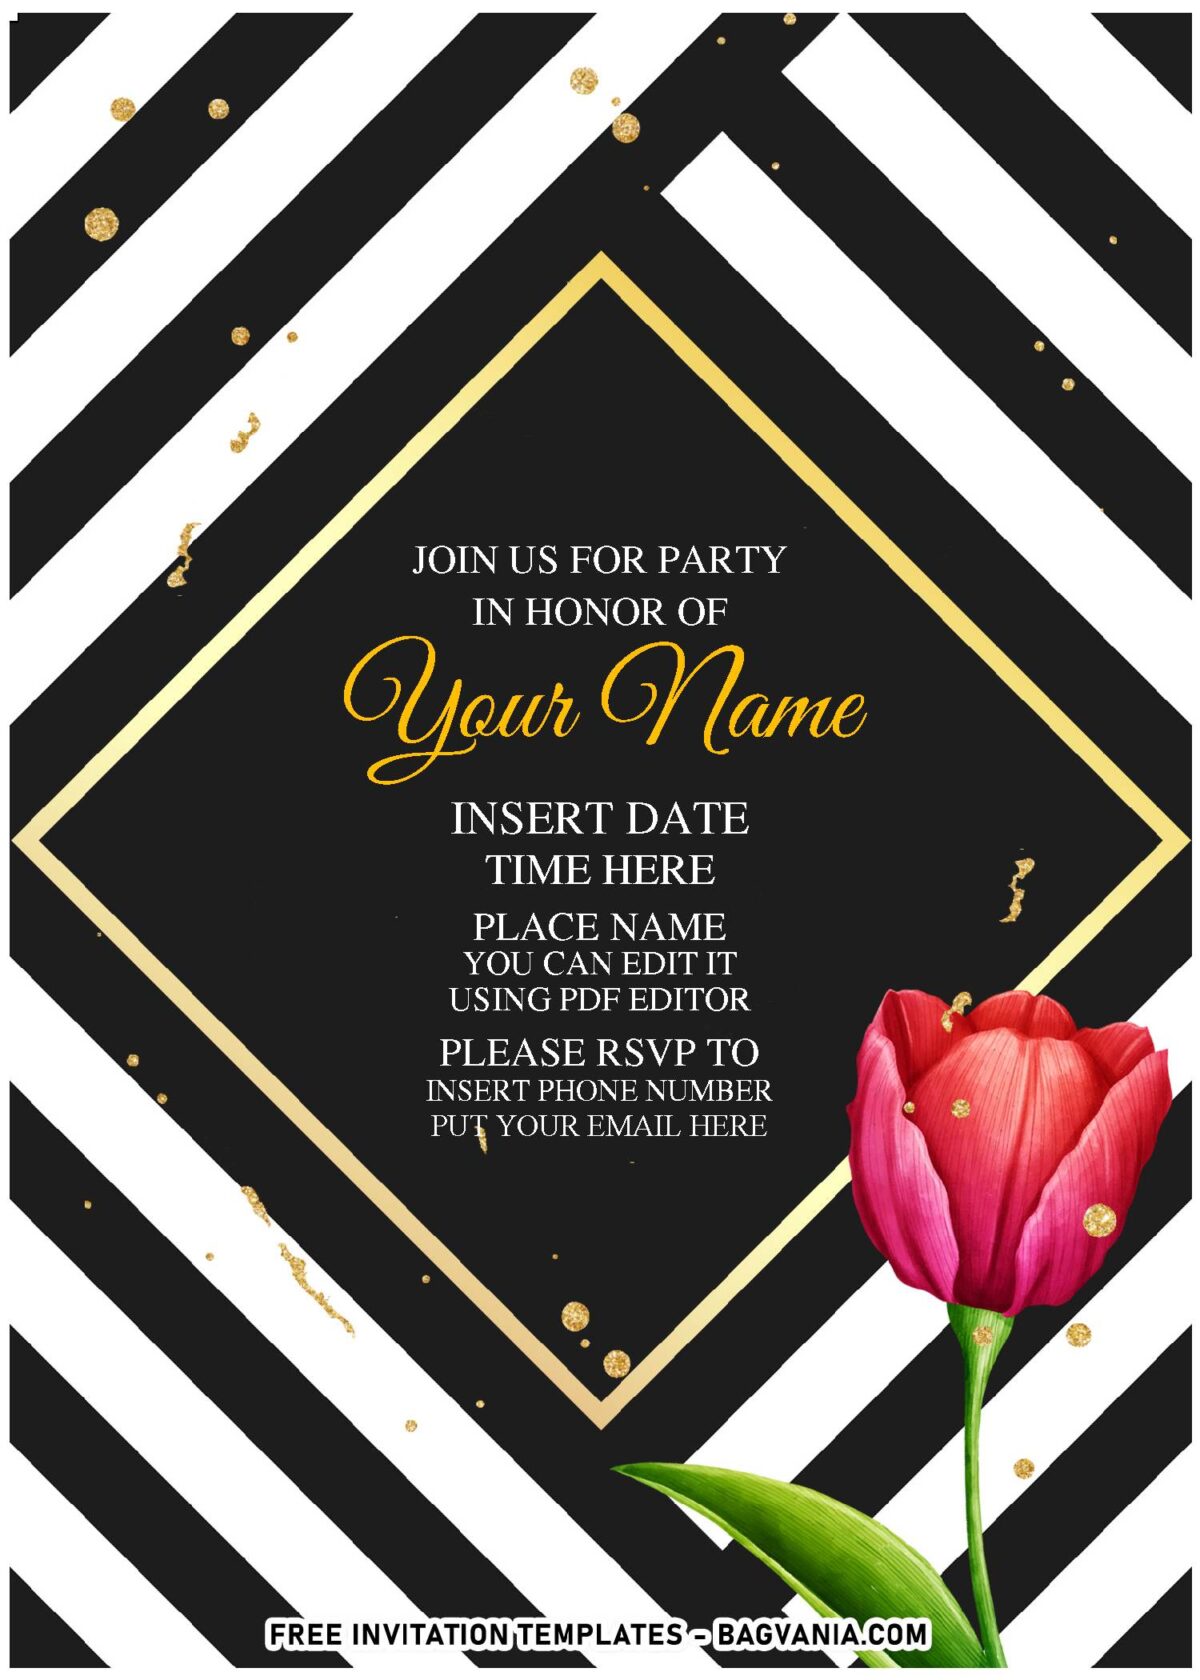 (Free Editable PDF) Classic Palette Black And White Floral Invitation Templates with elegant gold frame